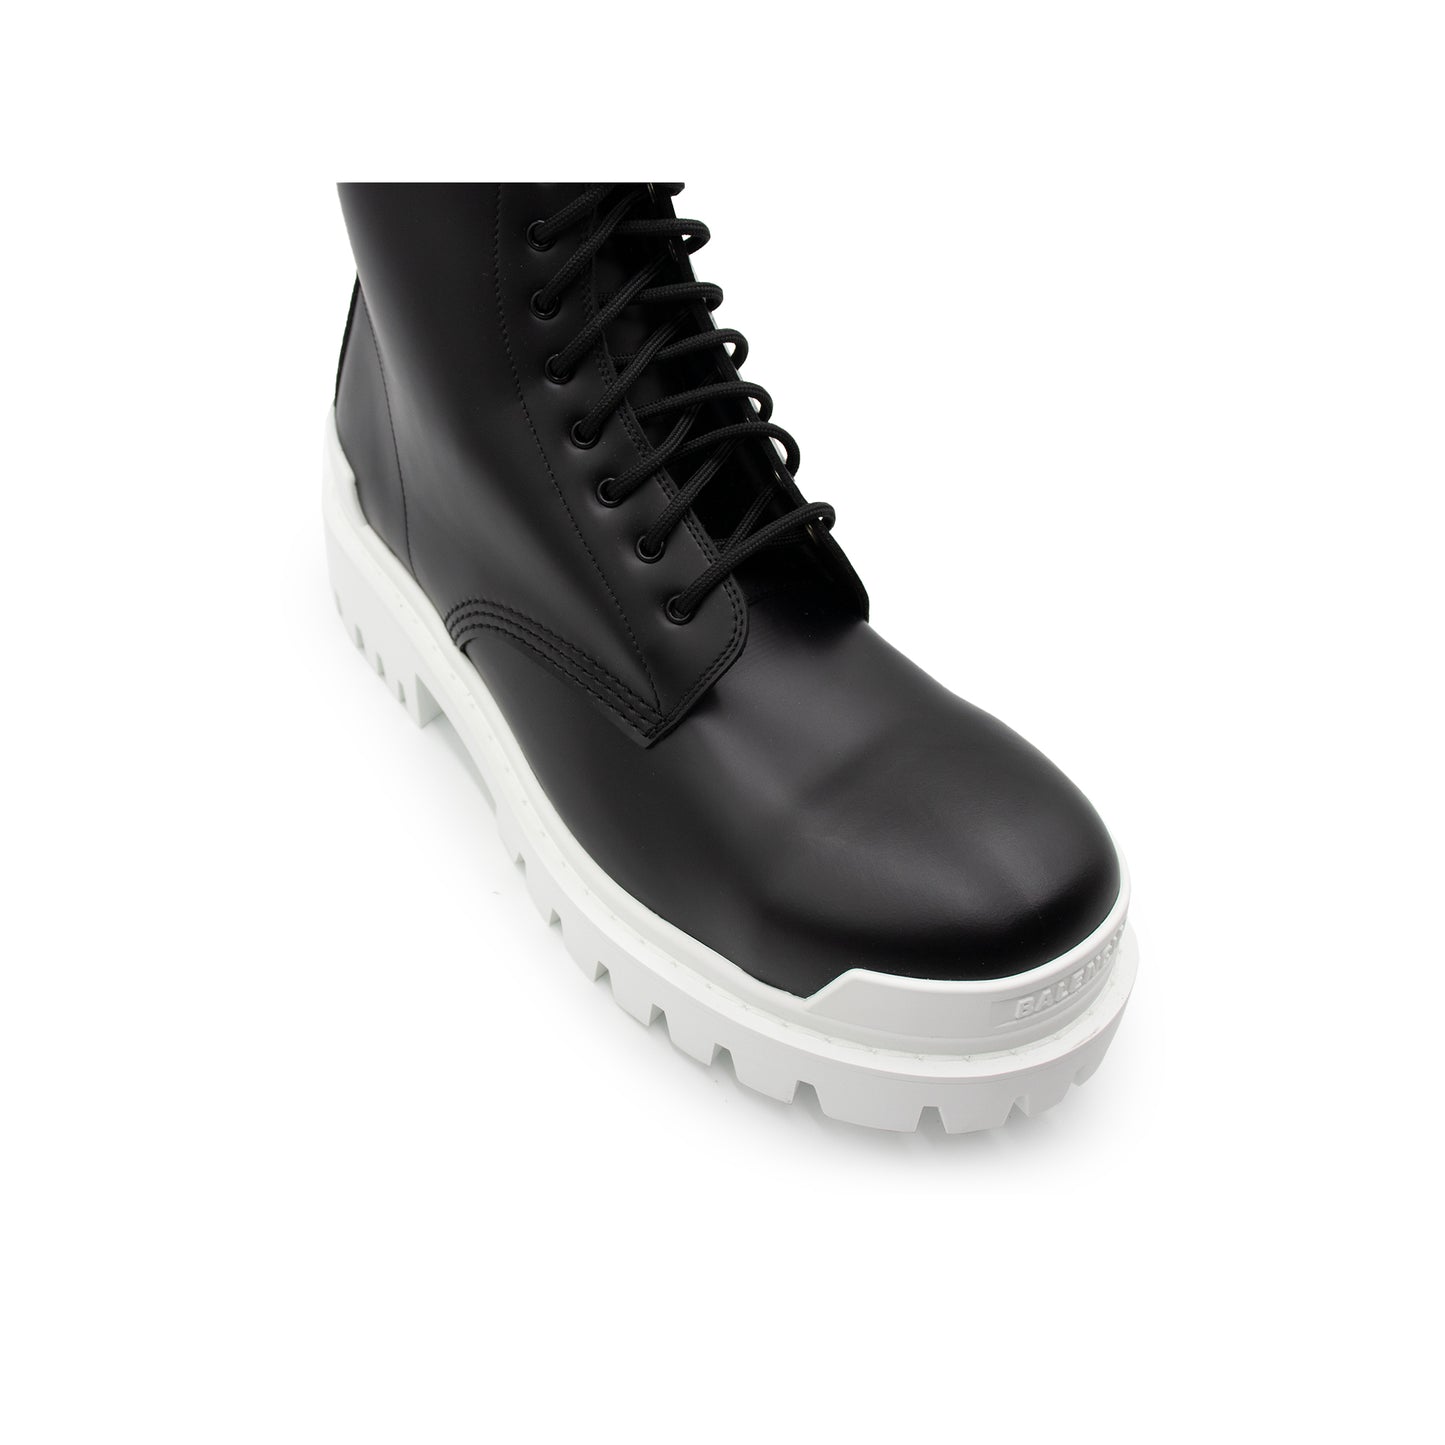 Strike Lace Up Boot in Black